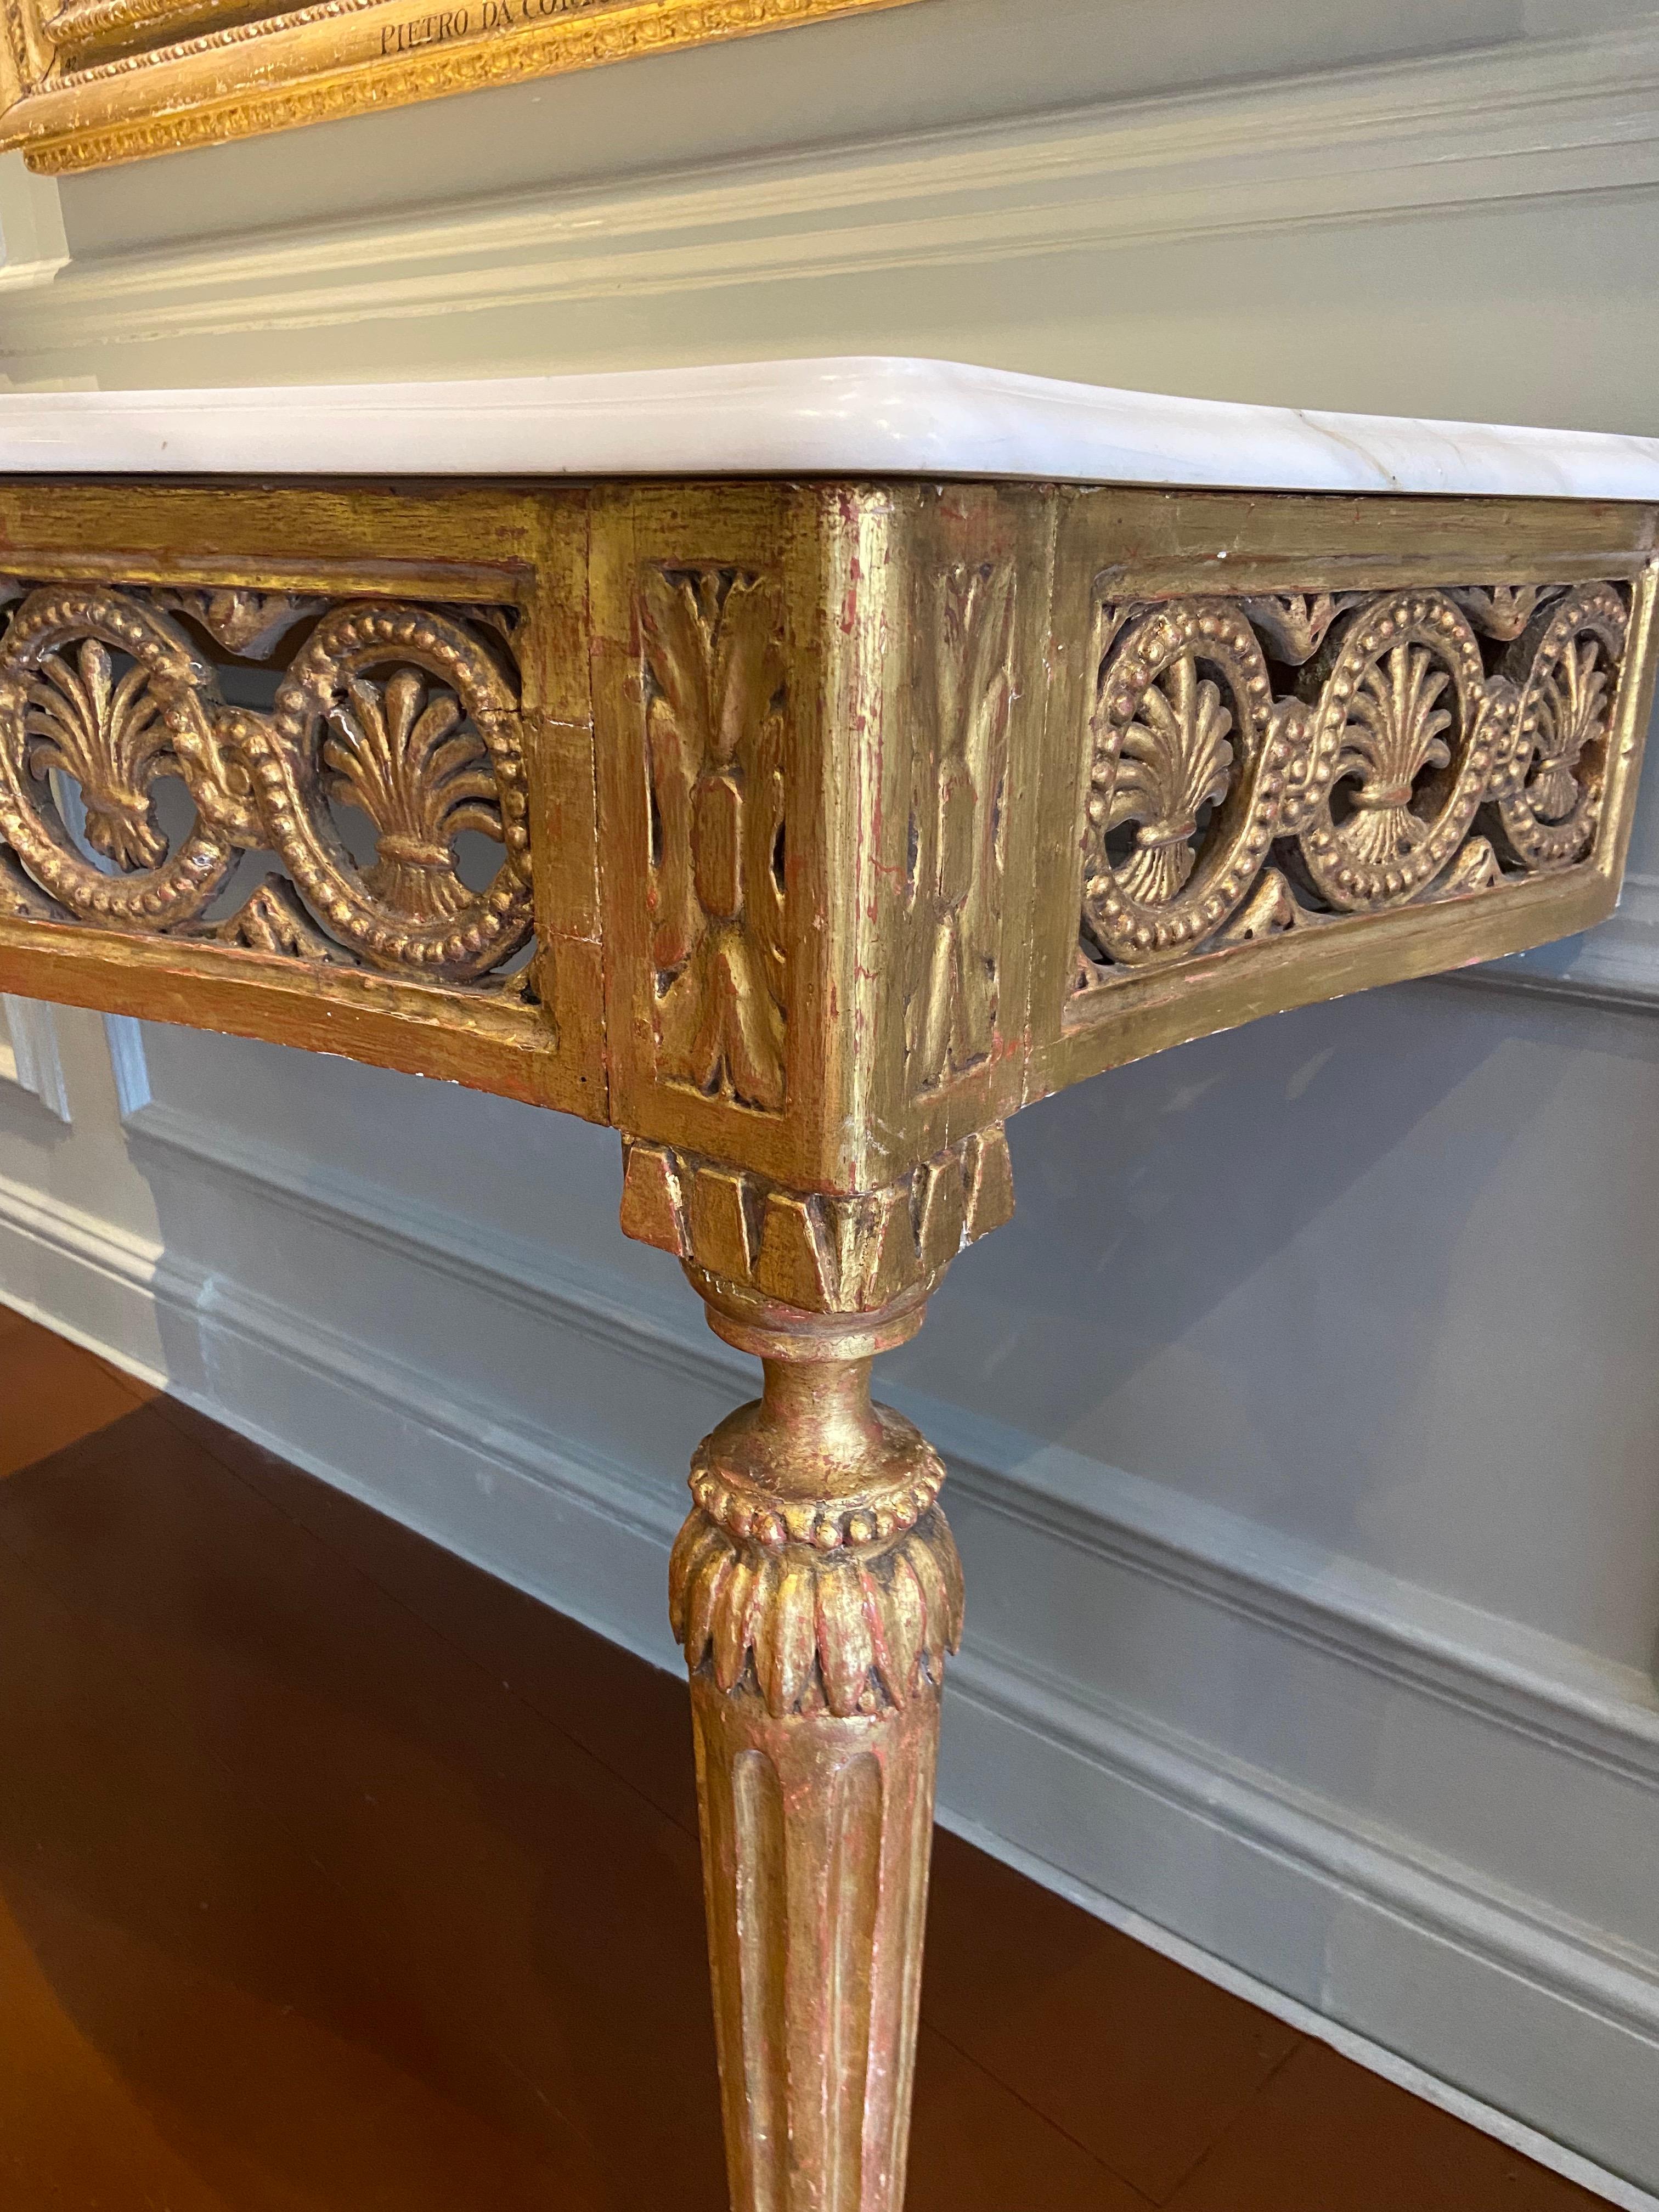 Northern Italian Serpentine Carved Gilt-Wood Console Table 'Late 18th Century' For Sale 1